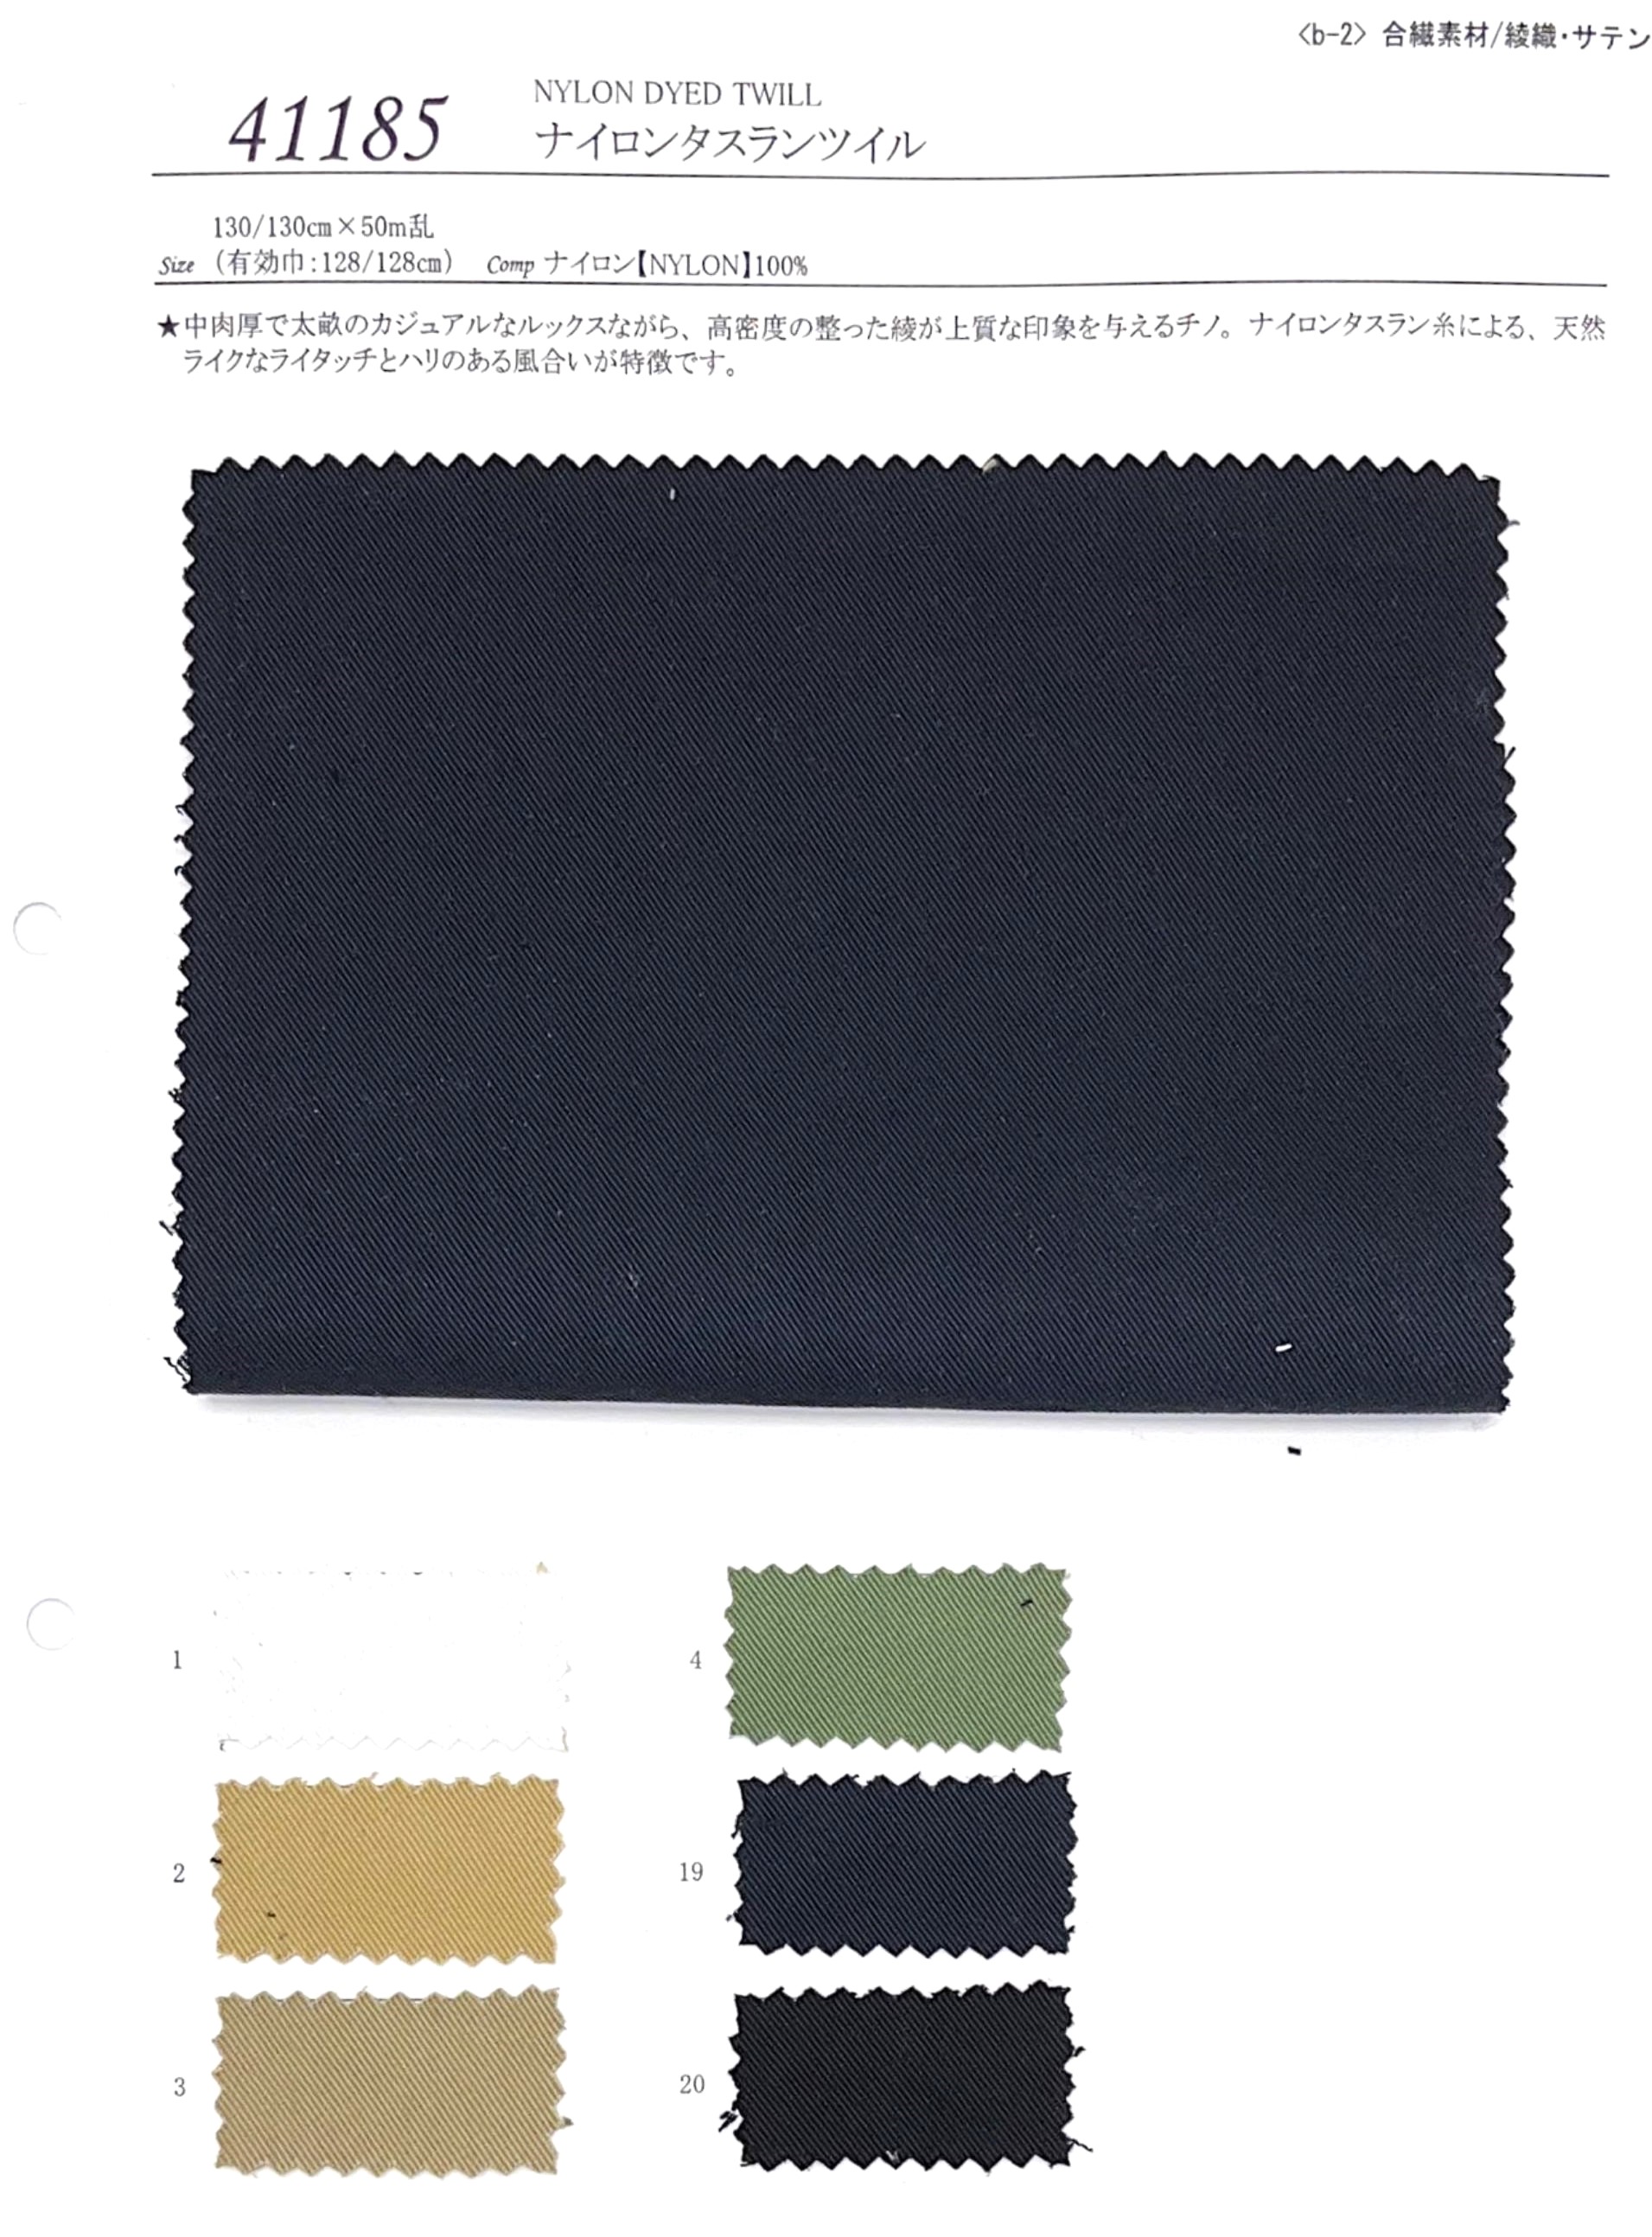 View NYLON100 DYED TWILL DYED TWILL